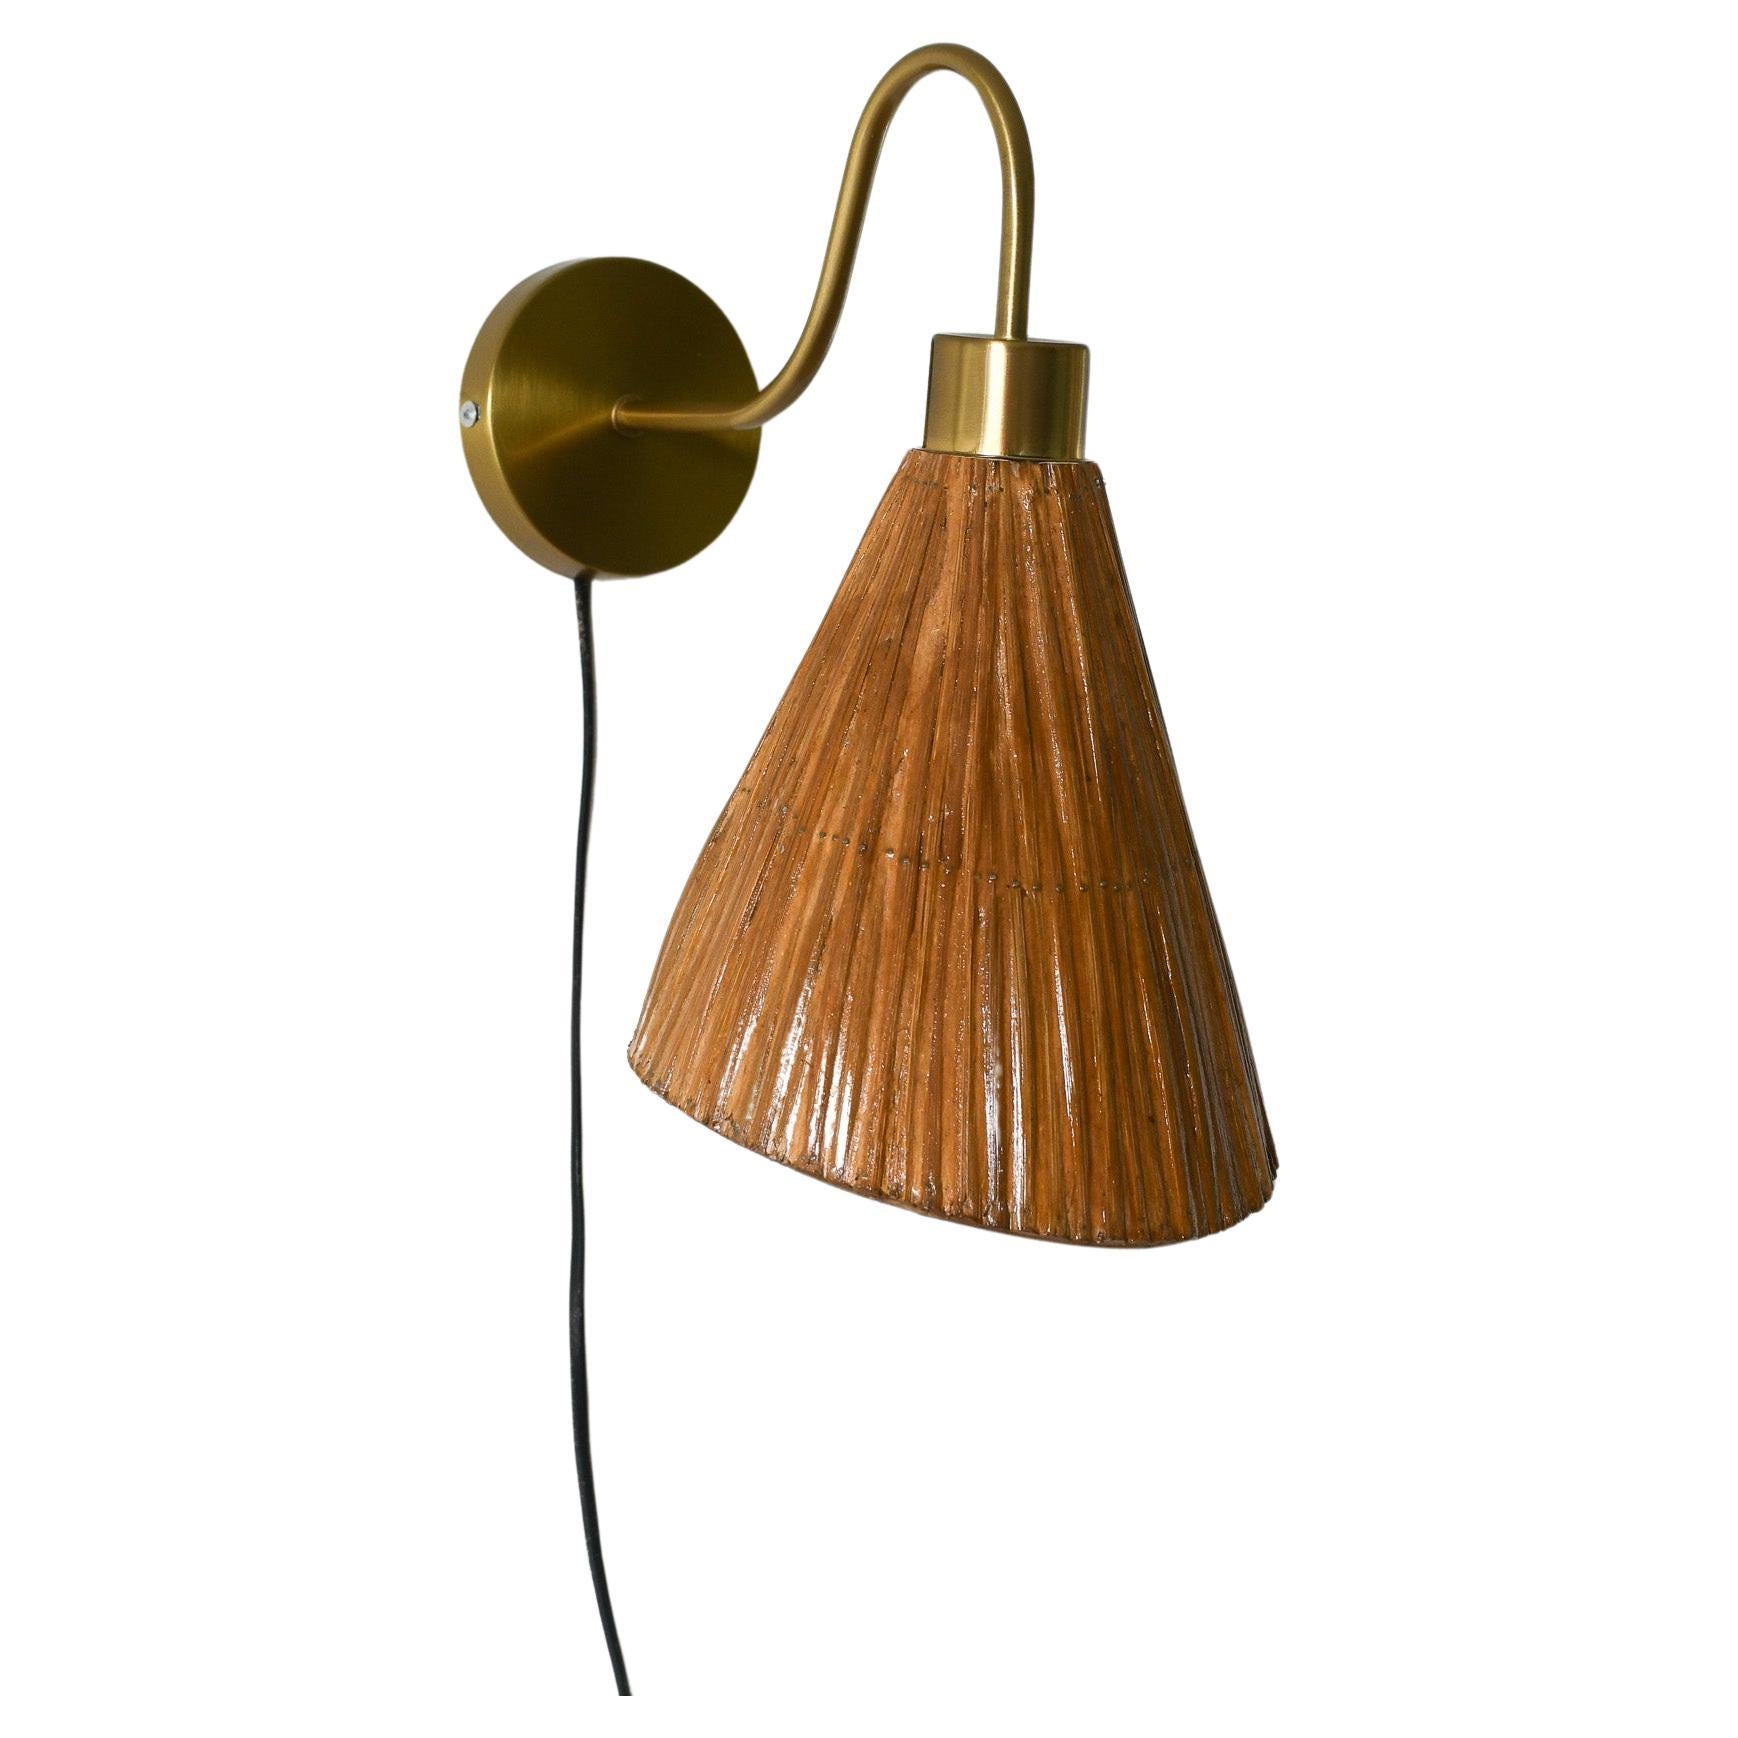 Introduce an elegant and exclusive atmosphere into your space with this handcrafted pencil reed rattan wall sconce lamp. Crafted in a cone shape with luxurious gold accents, this piece exudes sophistication. Enhance your decor with the natural